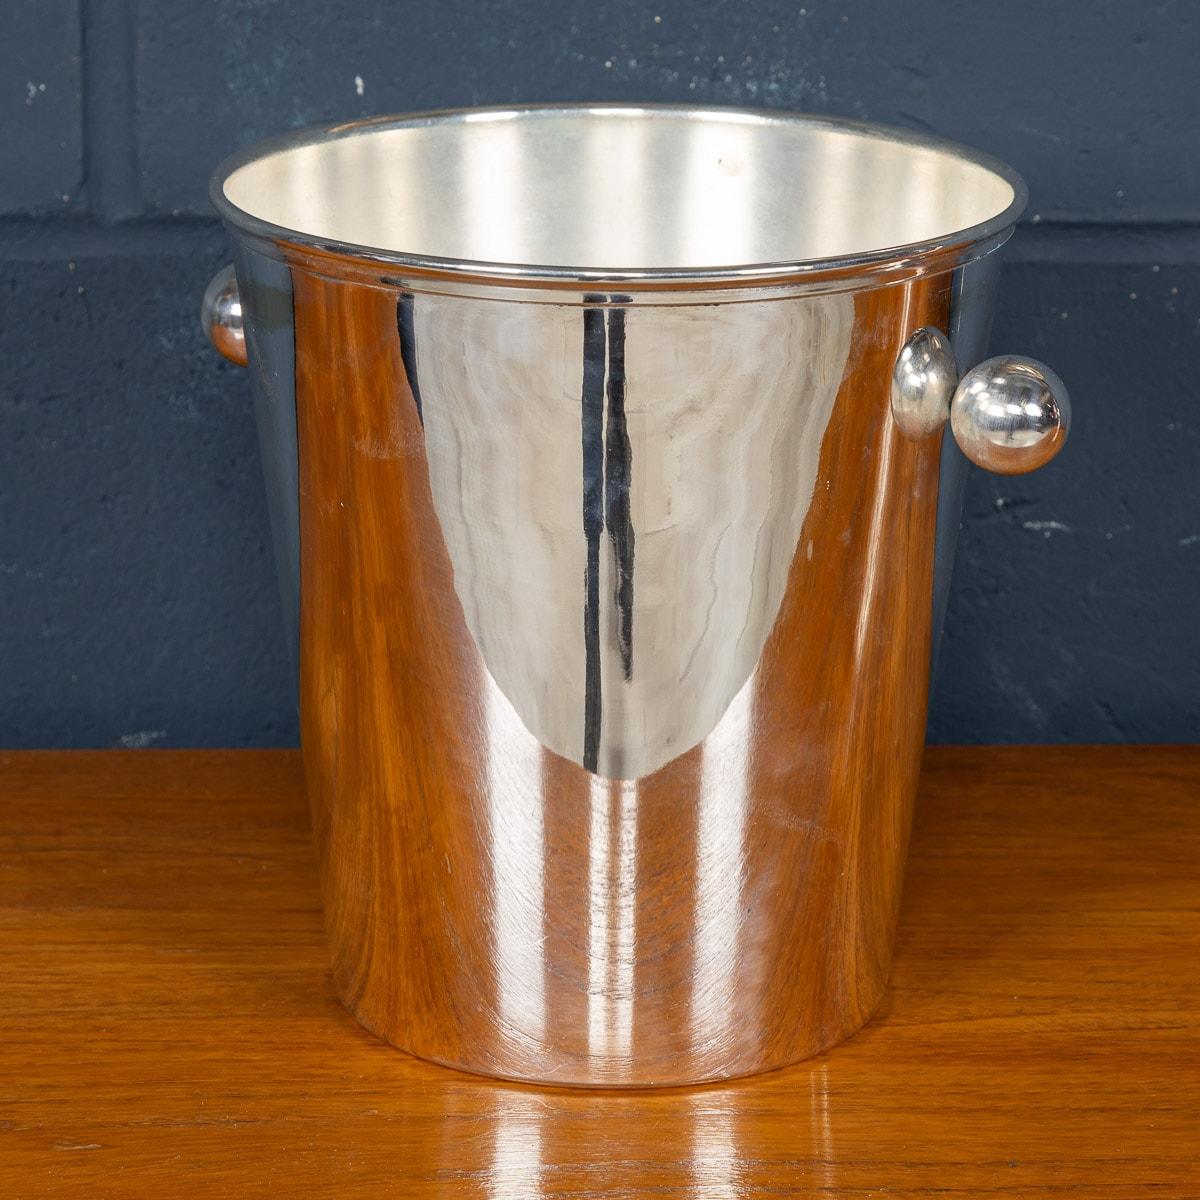 A lovely silver plated Art Deco wine cooler or champagne bucket. With a lovely tapered shape and ball handles, this champagne bucket dates from the 1940s or 50s and is fully restored. Stamped by the retailer Mappin and Webb to the underside, the